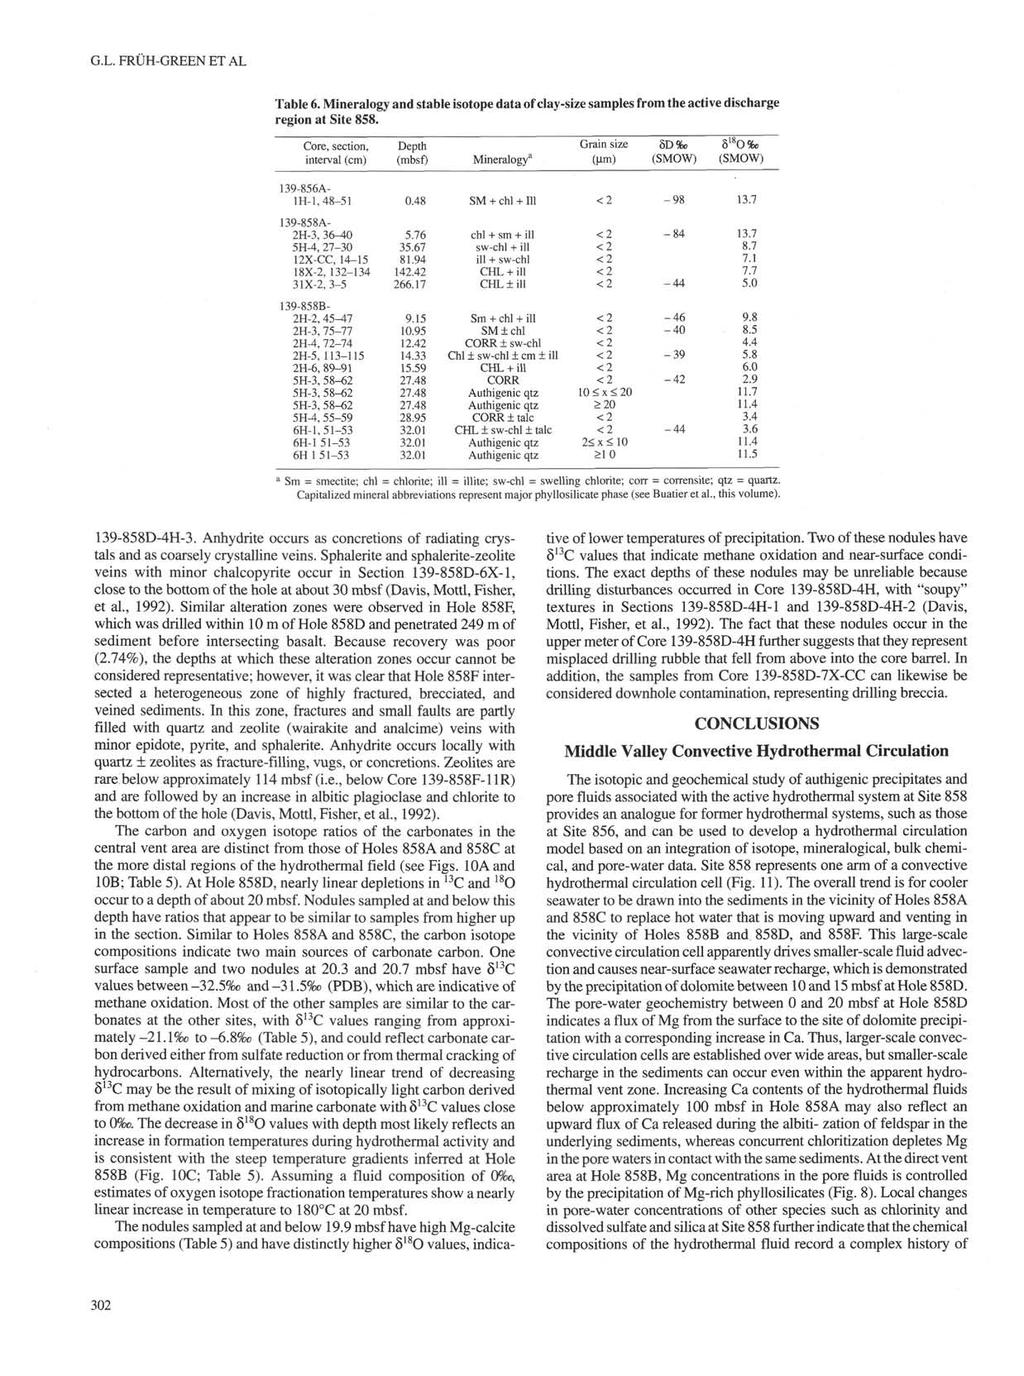 G.L. FRUH-GREEN ET AL Table 6. Mineralogy and stable isotope data of clay-size samples from the active discharge region at Site 858.